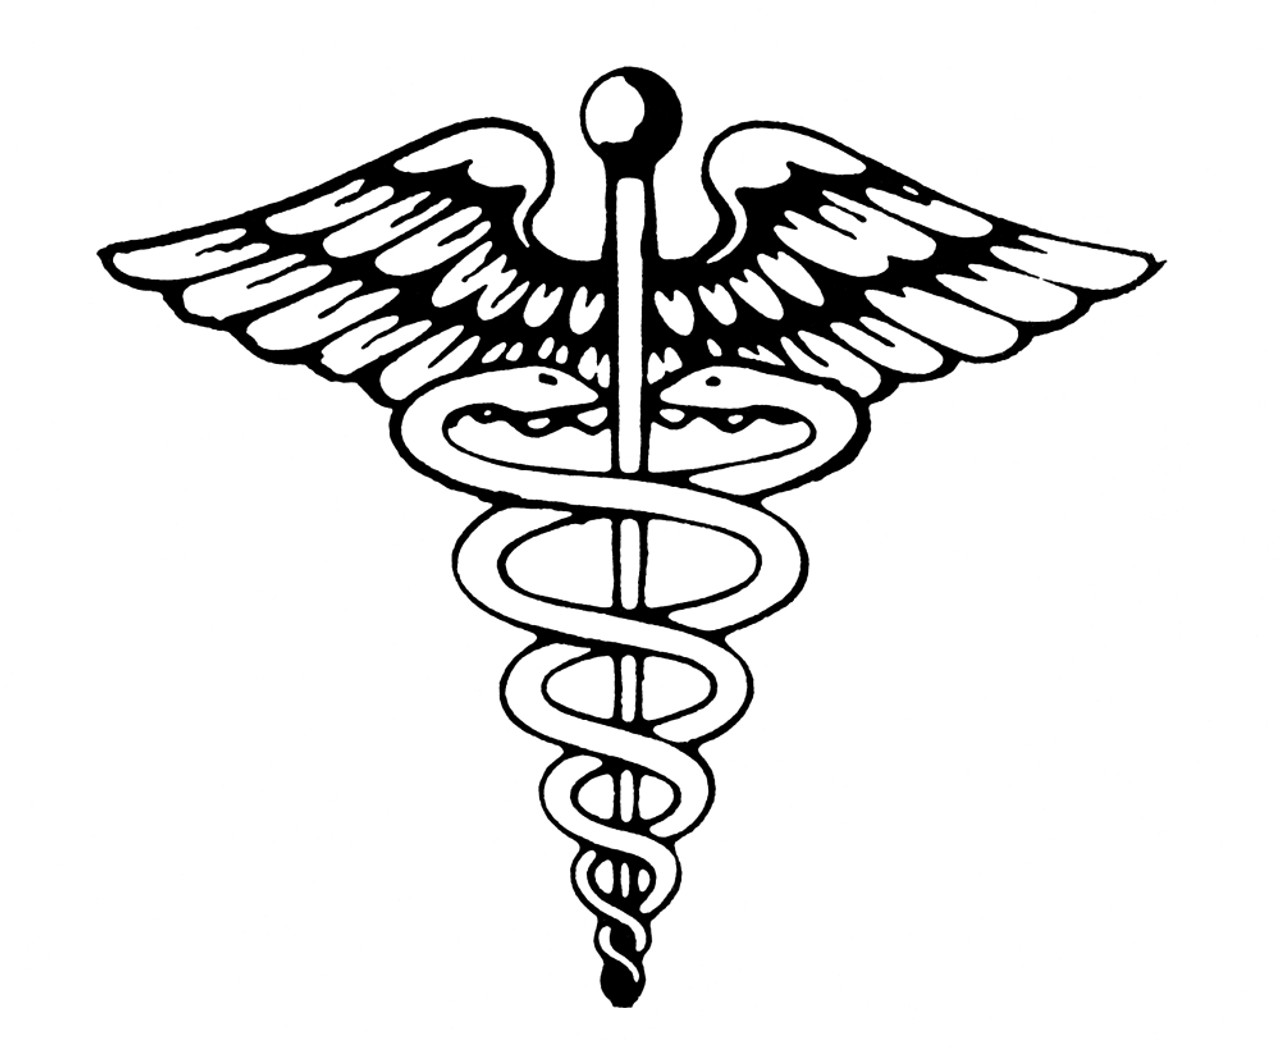 Doctor Staff Medical Caduceus Emblem Vector Illustration Hand Drawing  Royalty Free SVG, Cliparts, Vectors, and Stock Illustration. Image  107882172.